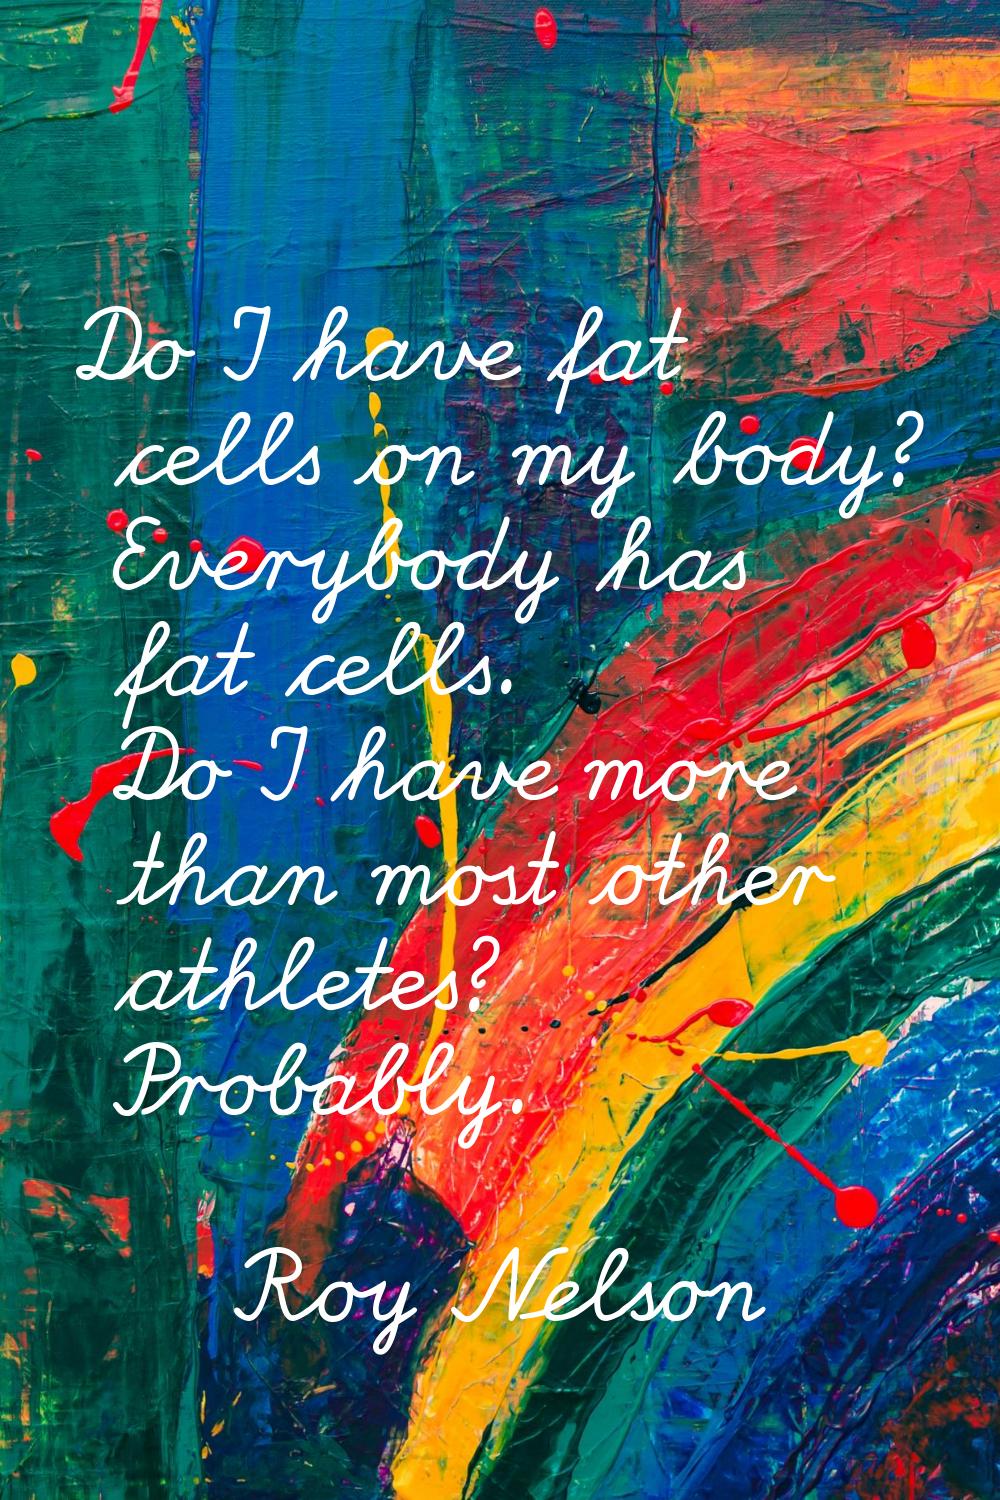 Do I have fat cells on my body? Everybody has fat cells. Do I have more than most other athletes? P